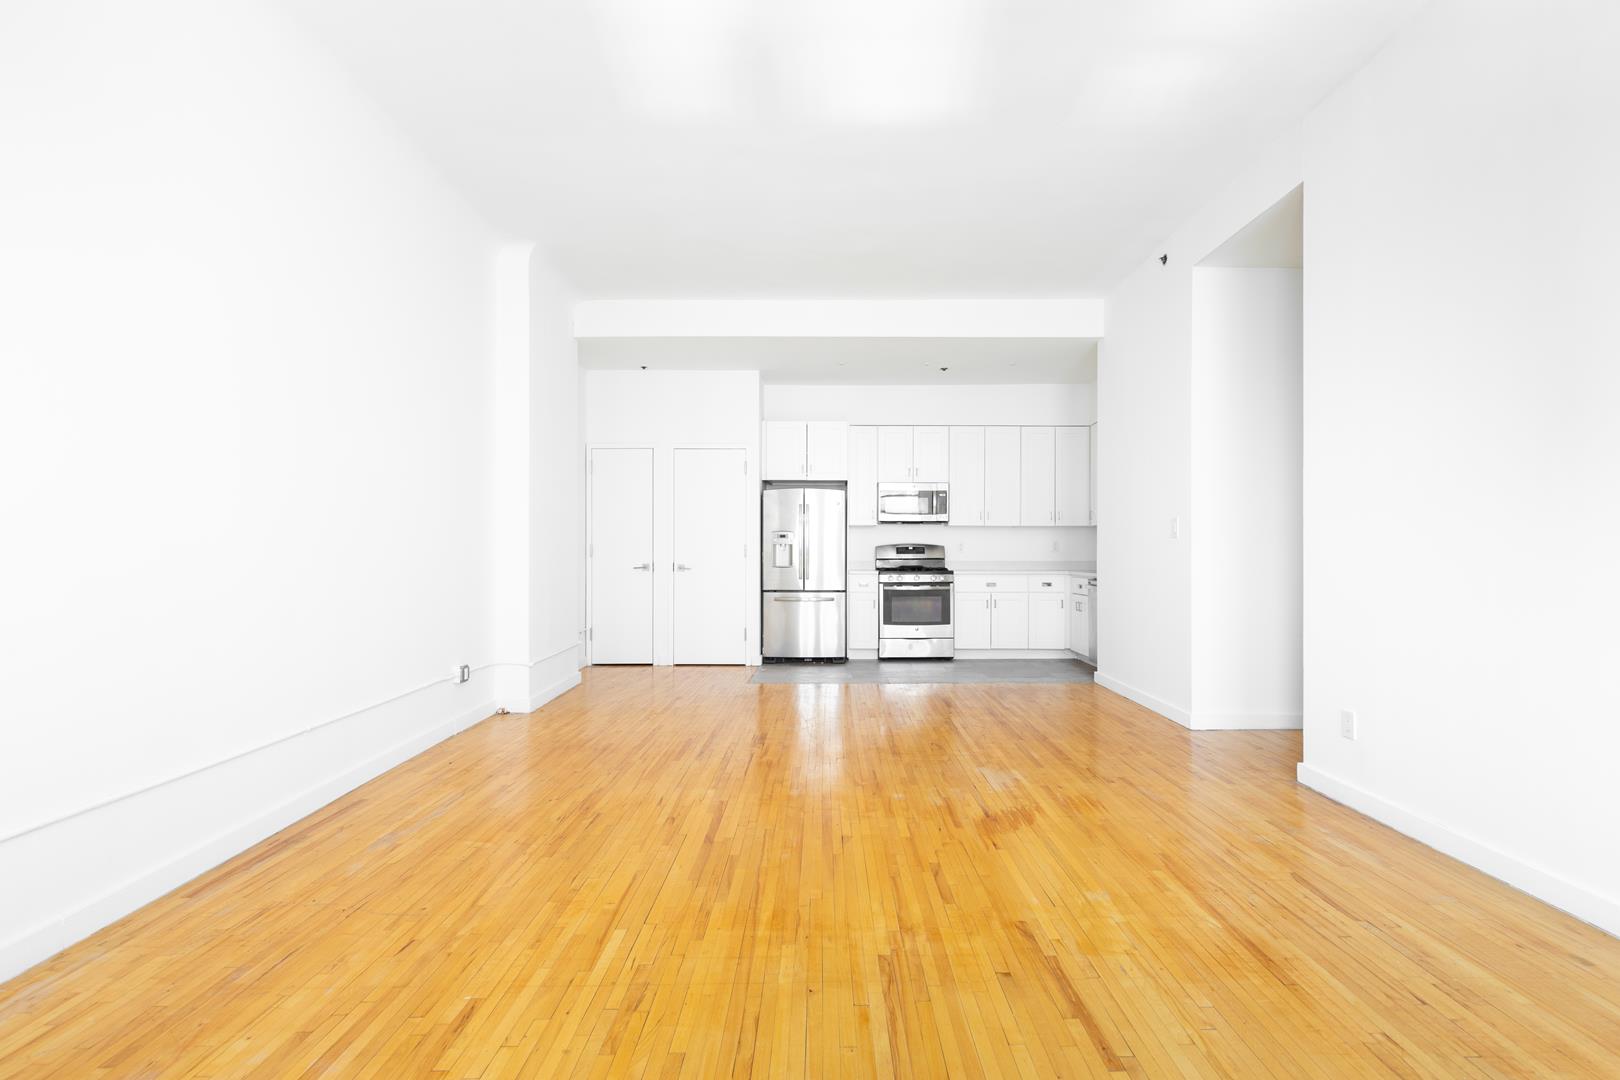 135 William Street 10-B, Lower Manhattan, Downtown, NYC - 4 Bedrooms  
2 Bathrooms  
5 Rooms - 